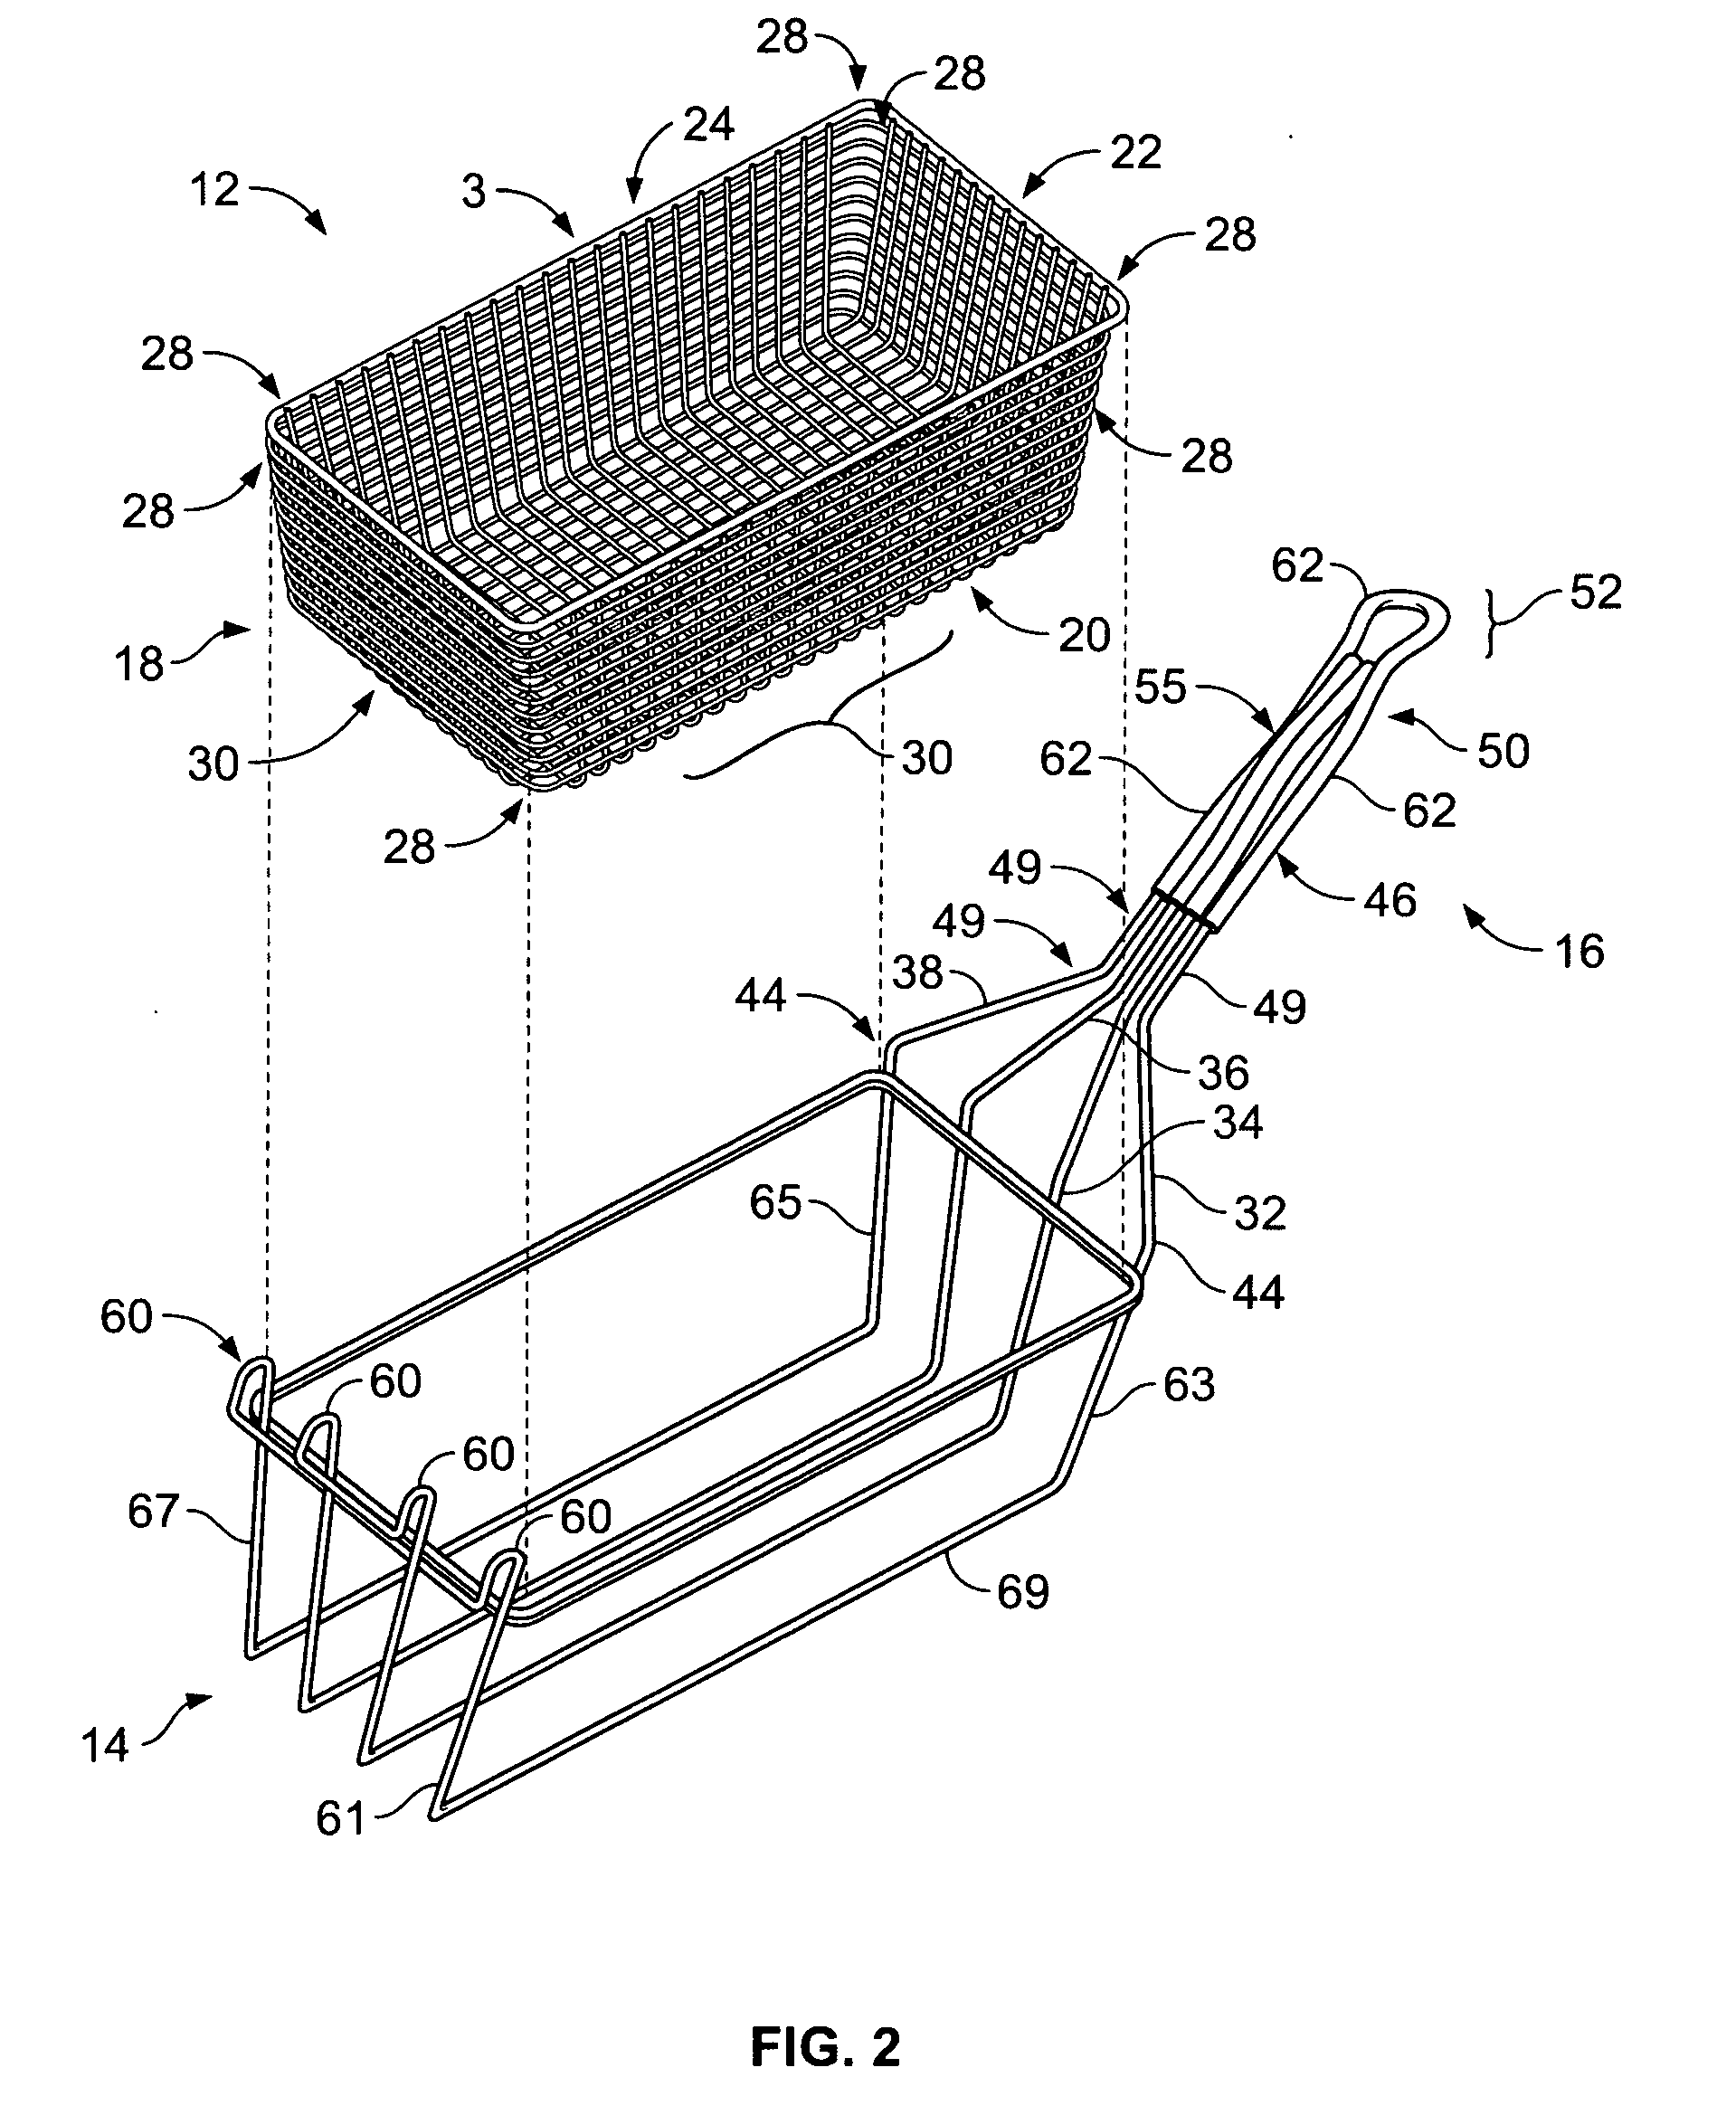 In-frame wire fry basket with ergonomic handle